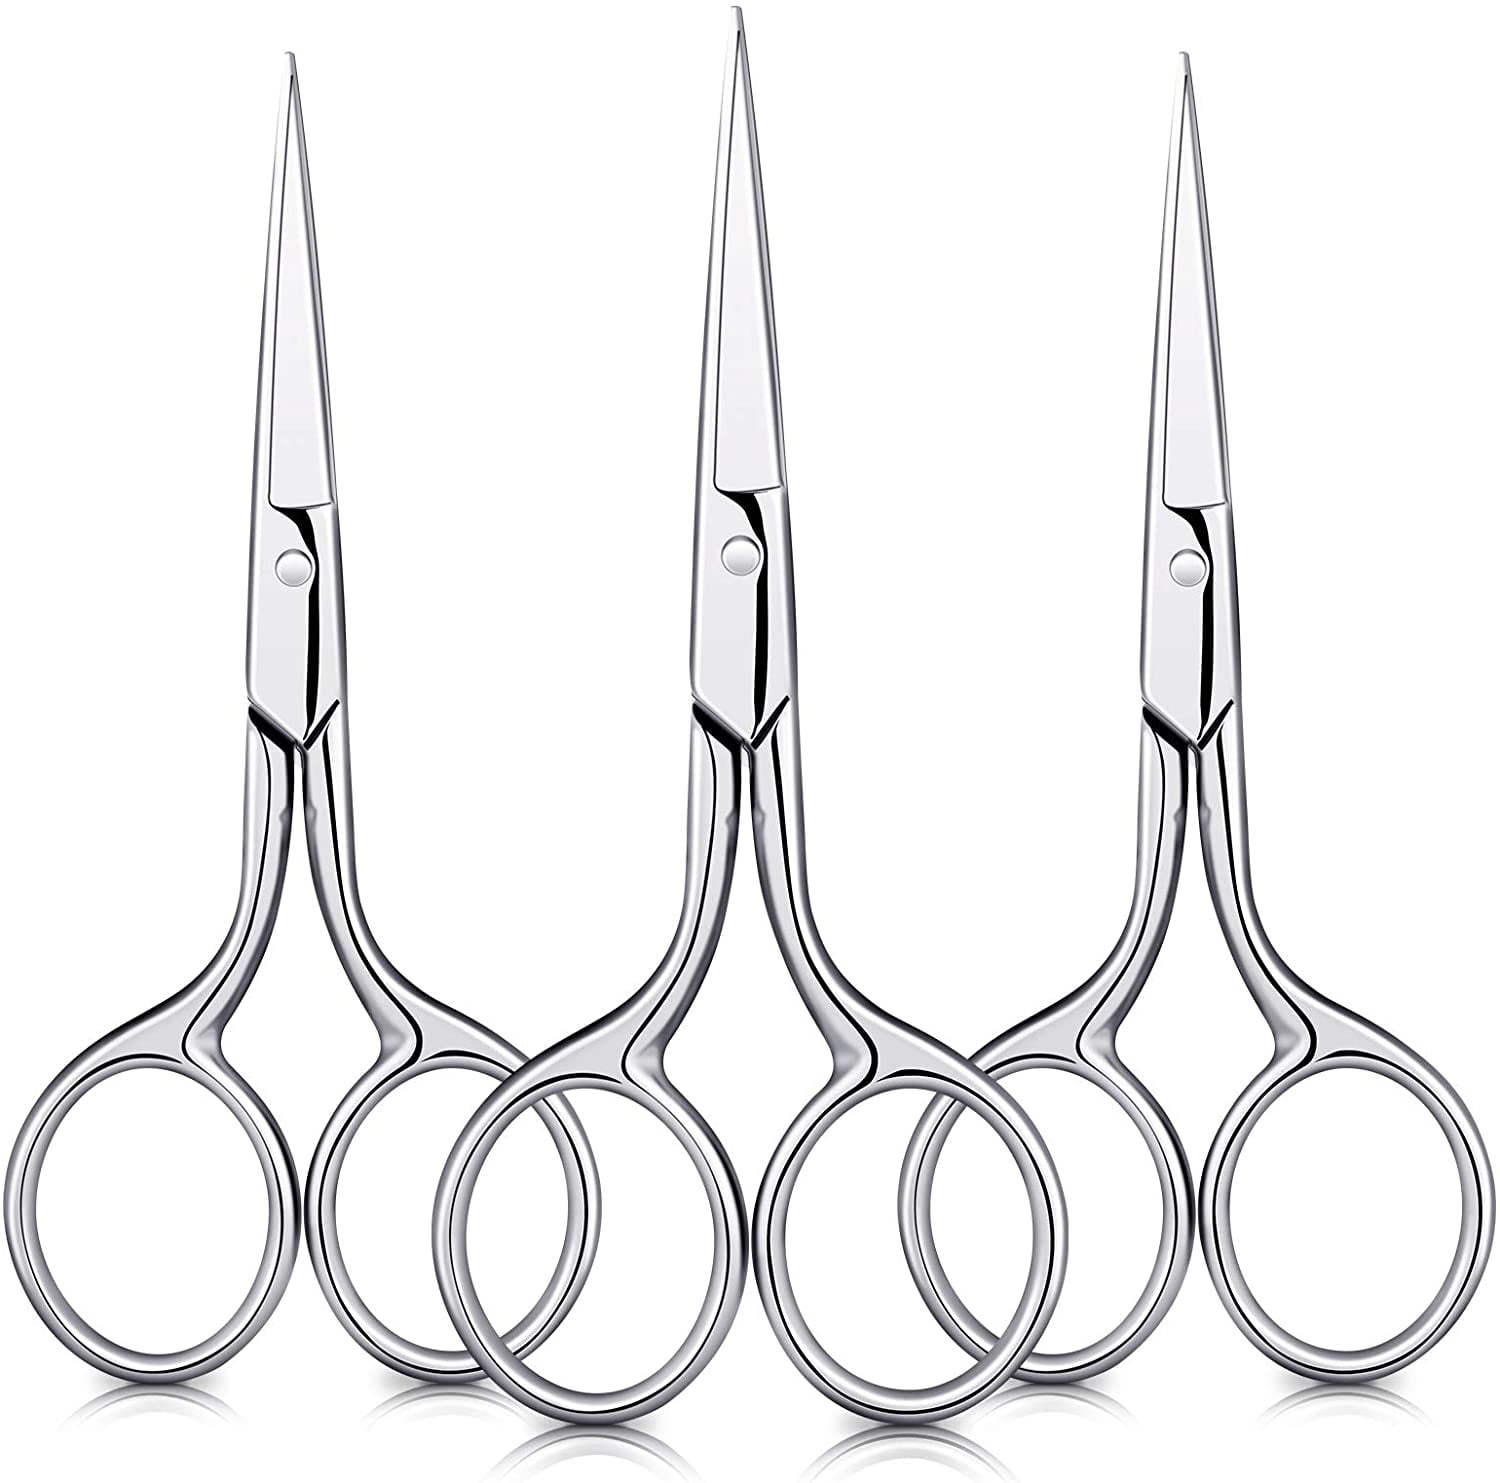 6 /8/5 Mini Small Scissors Stainless Steel - Tailoring Craft Sewing